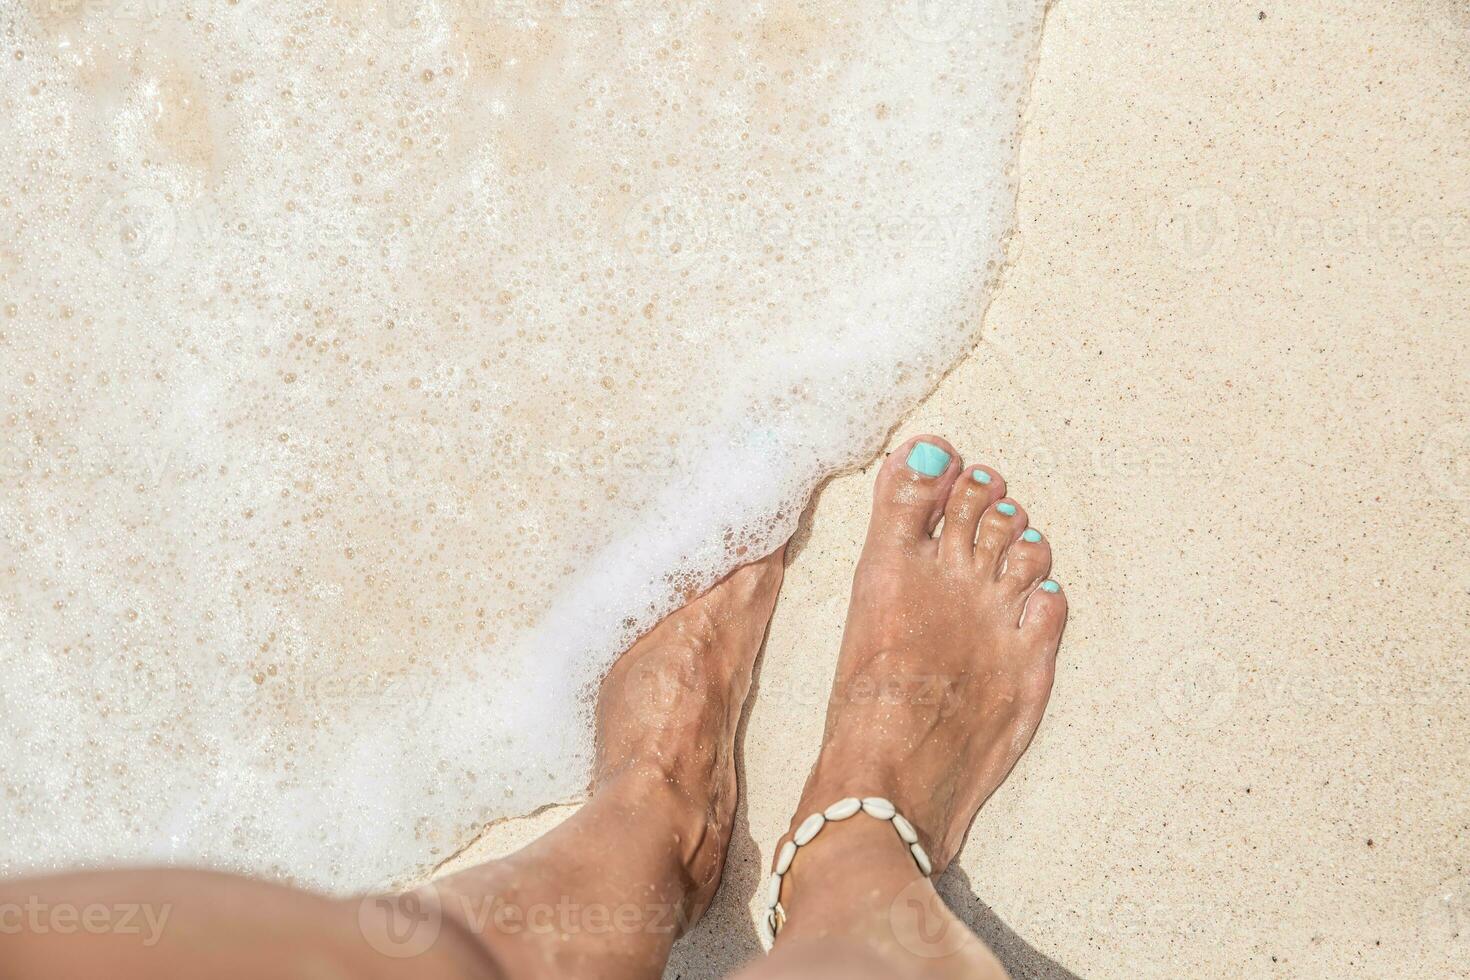 Bare feet of a woman with turquoise nail polish standing on a sandy beach washed out by foamy wave of water from the sea photo